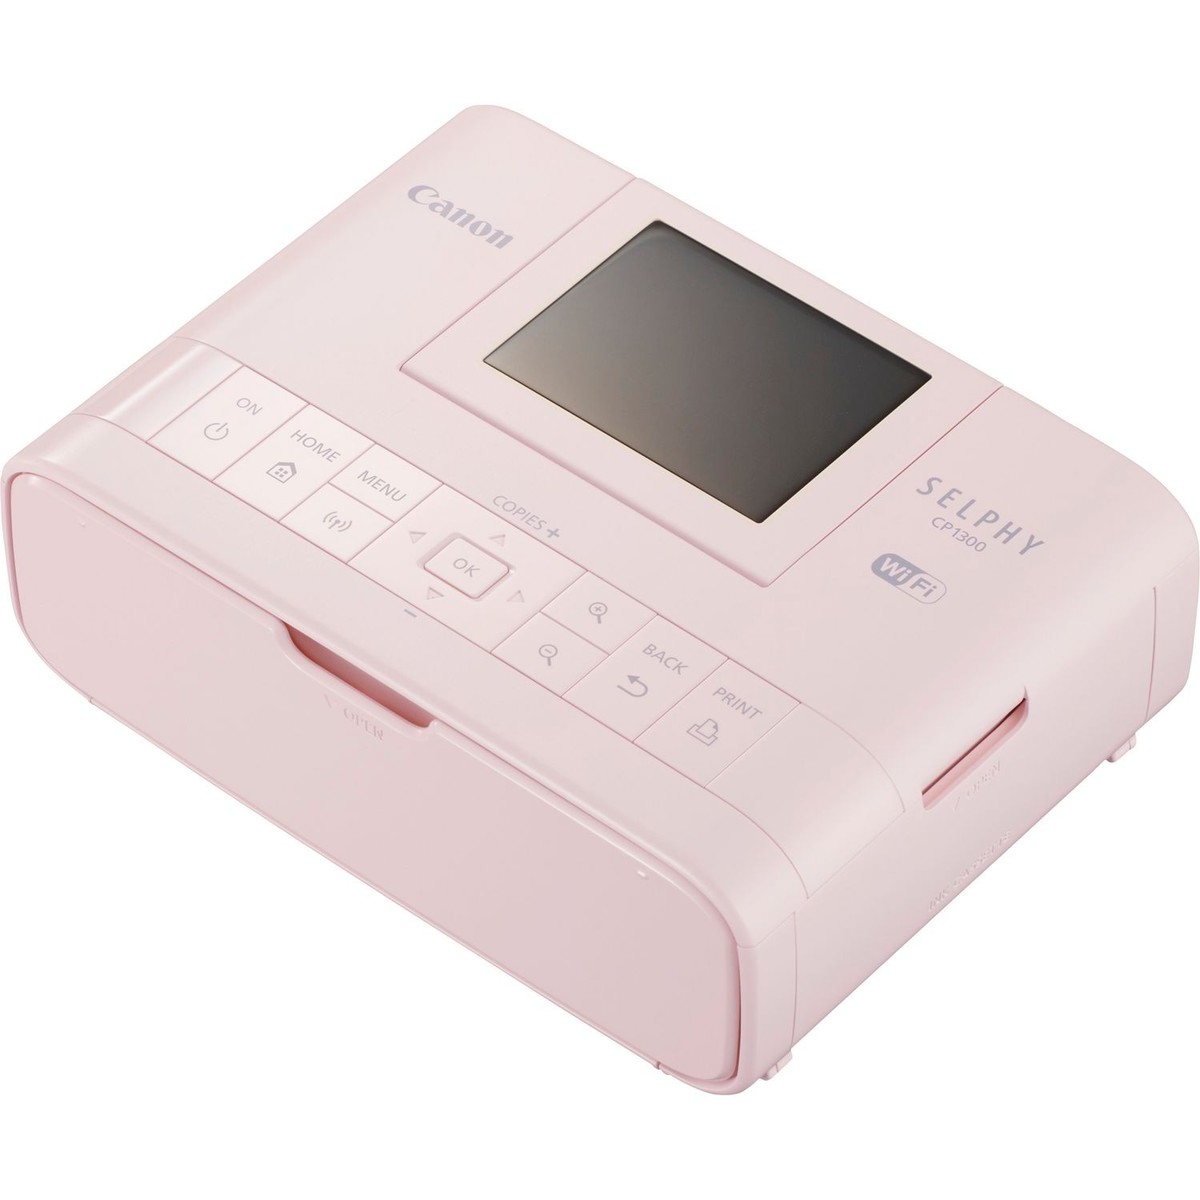 Canon Selphy PrinterCP1300 Pink